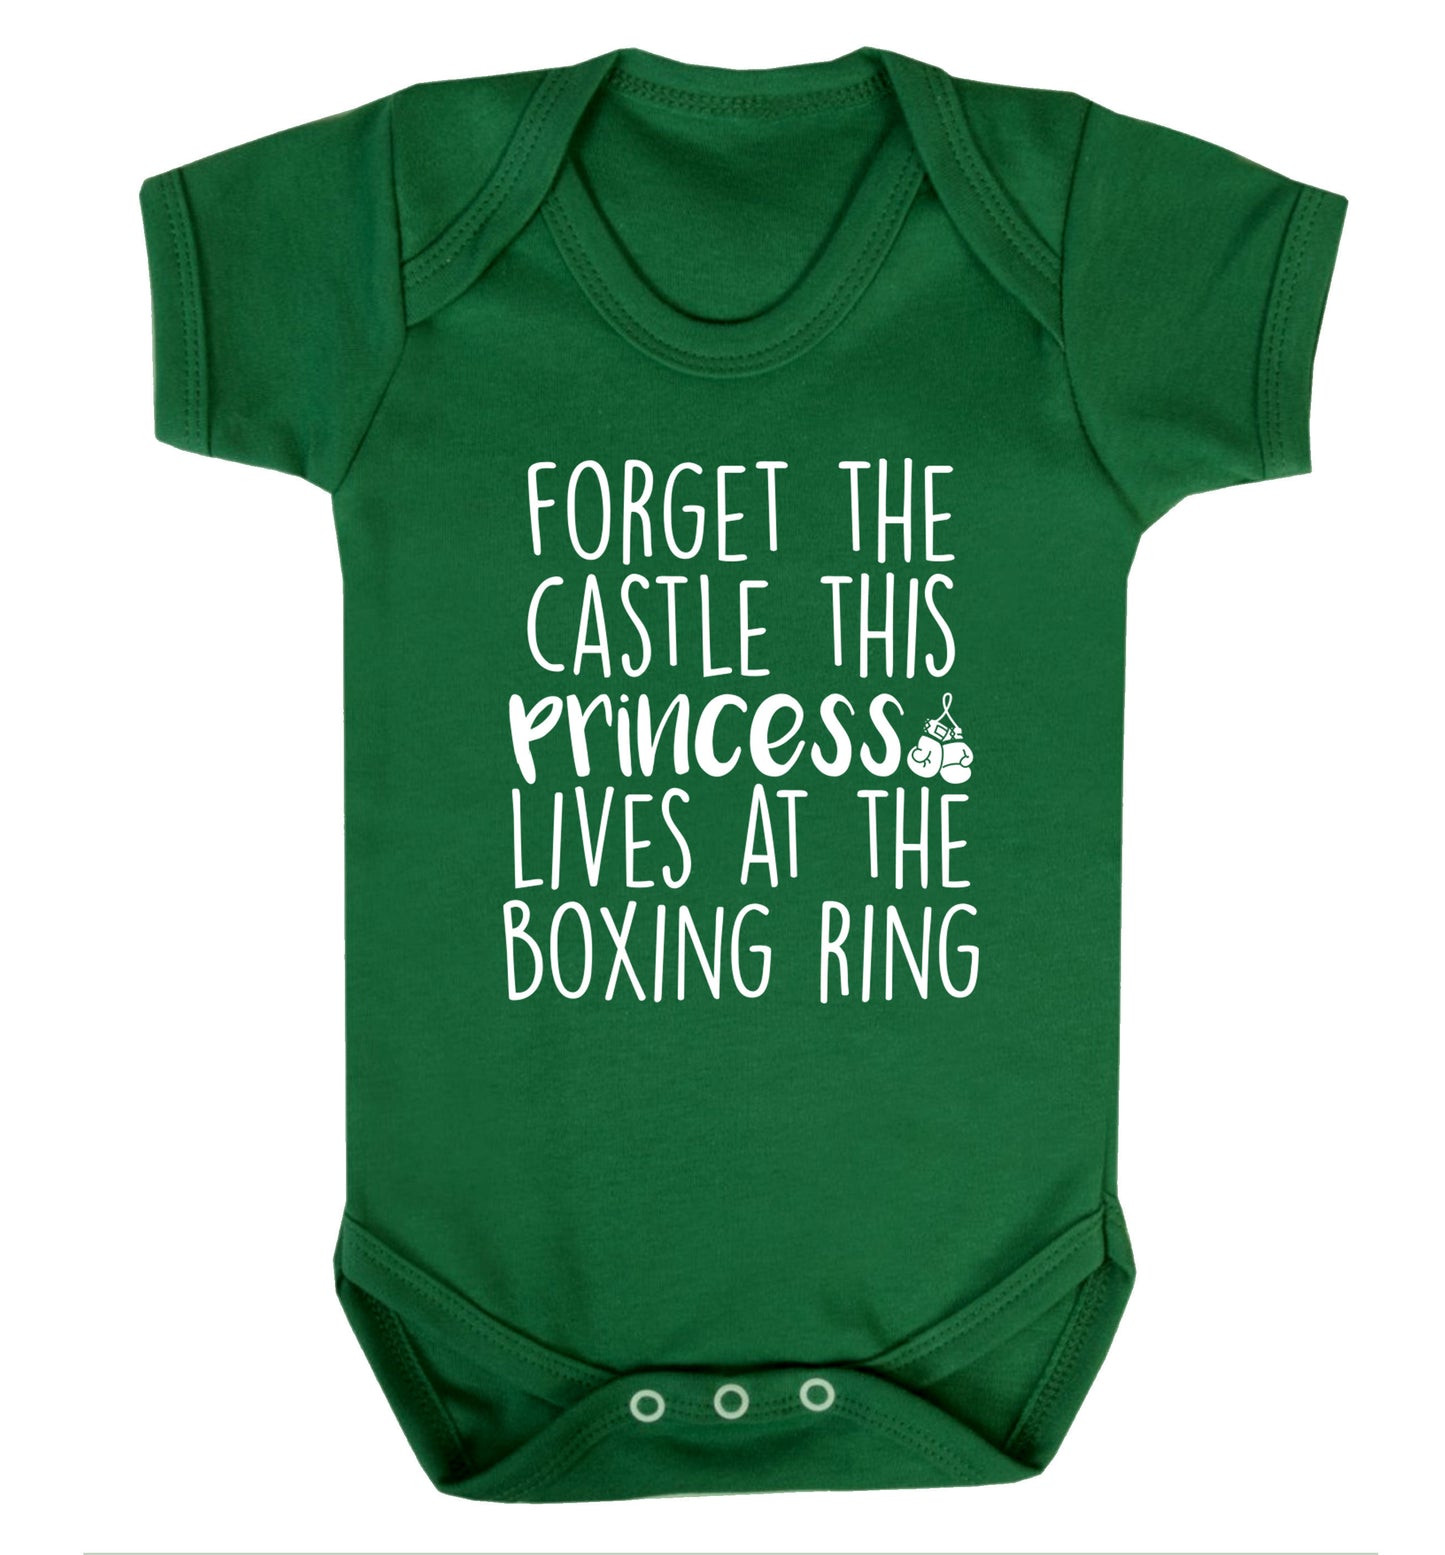 Forget the castle this princess lives at the boxing ring Baby Vest green 18-24 months